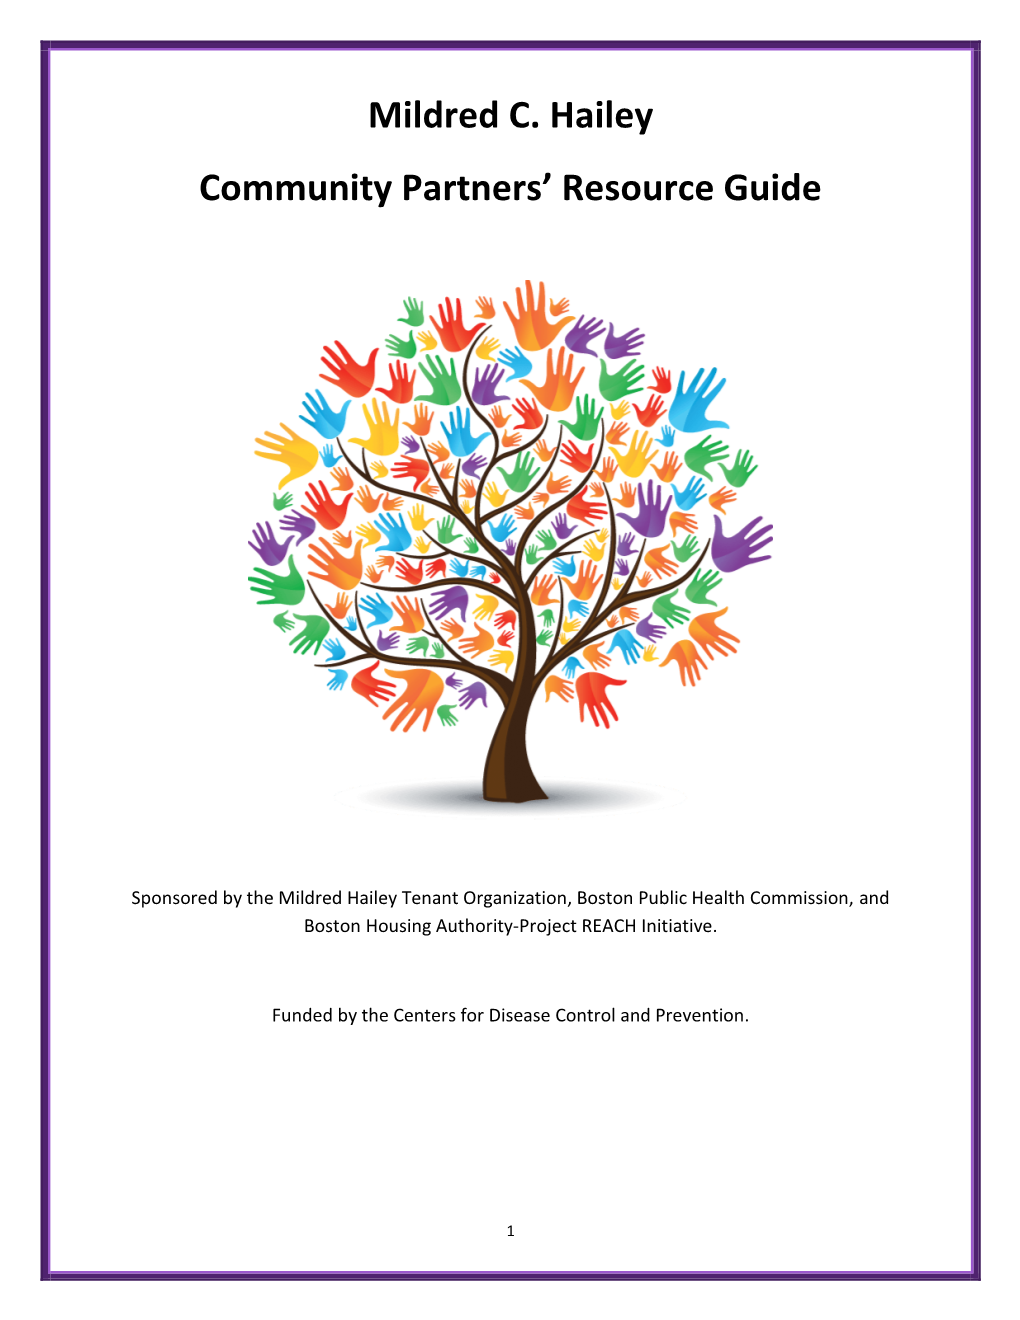 Mildred C. Hailey Community Partners’ Resource Guide